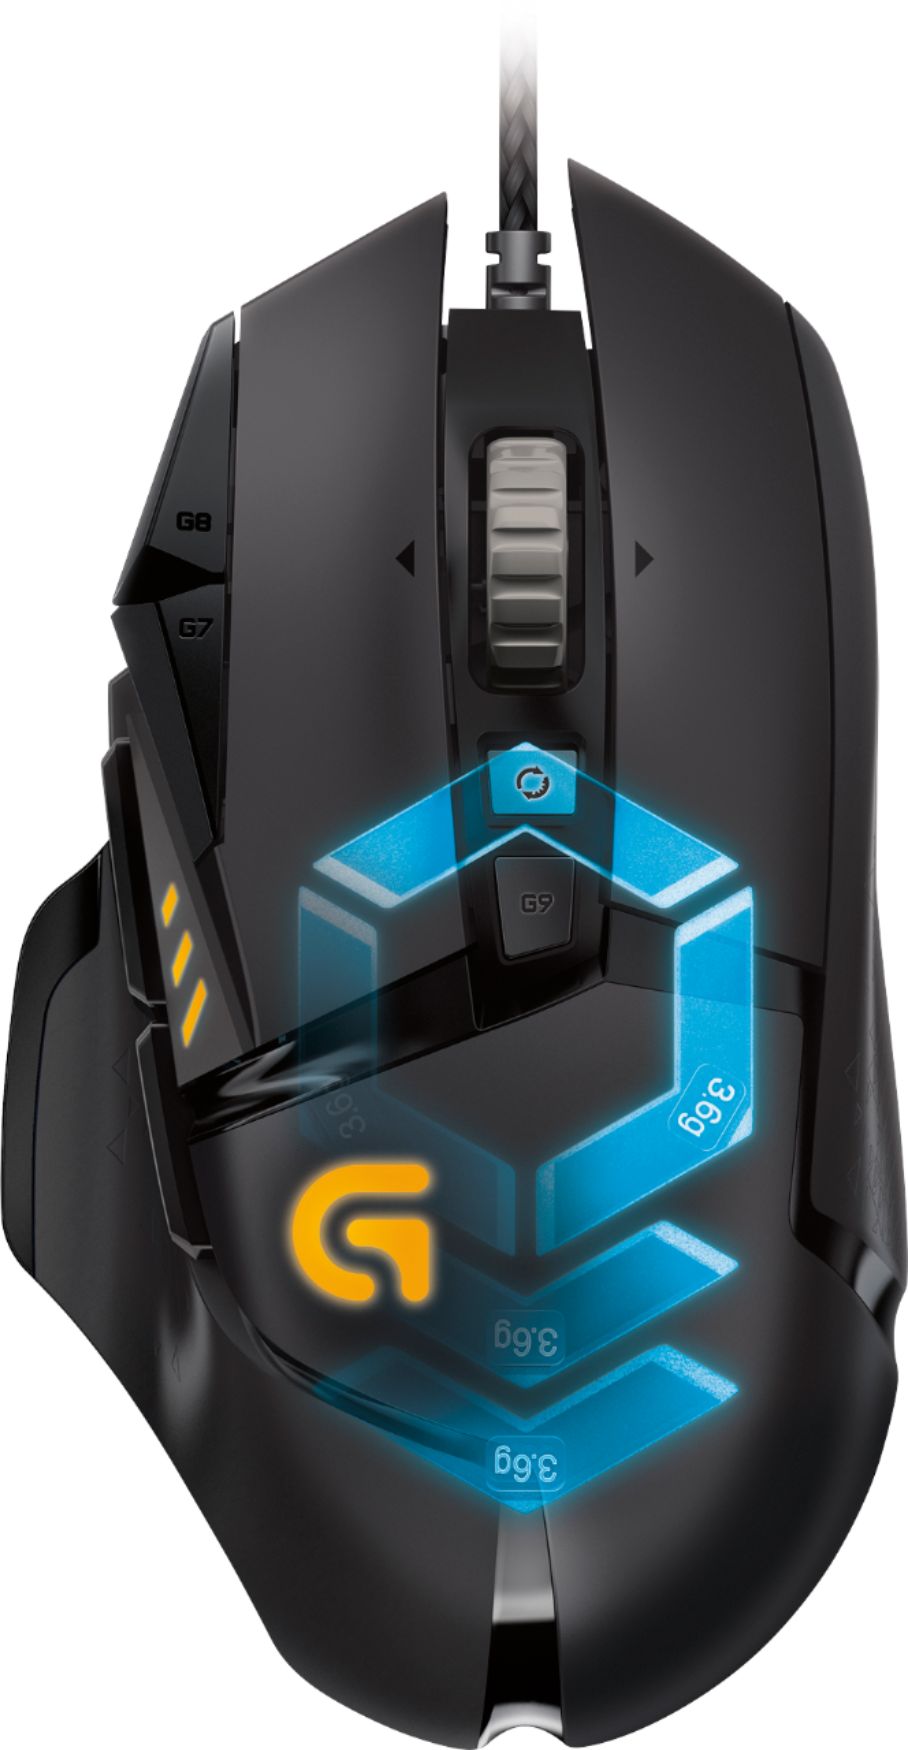 Logitech G502 Proteus Spectrum Wired Optical 11 Button Scrolling Gaming Mouse With Rgb Lighting Black 910 004615 Best Buy